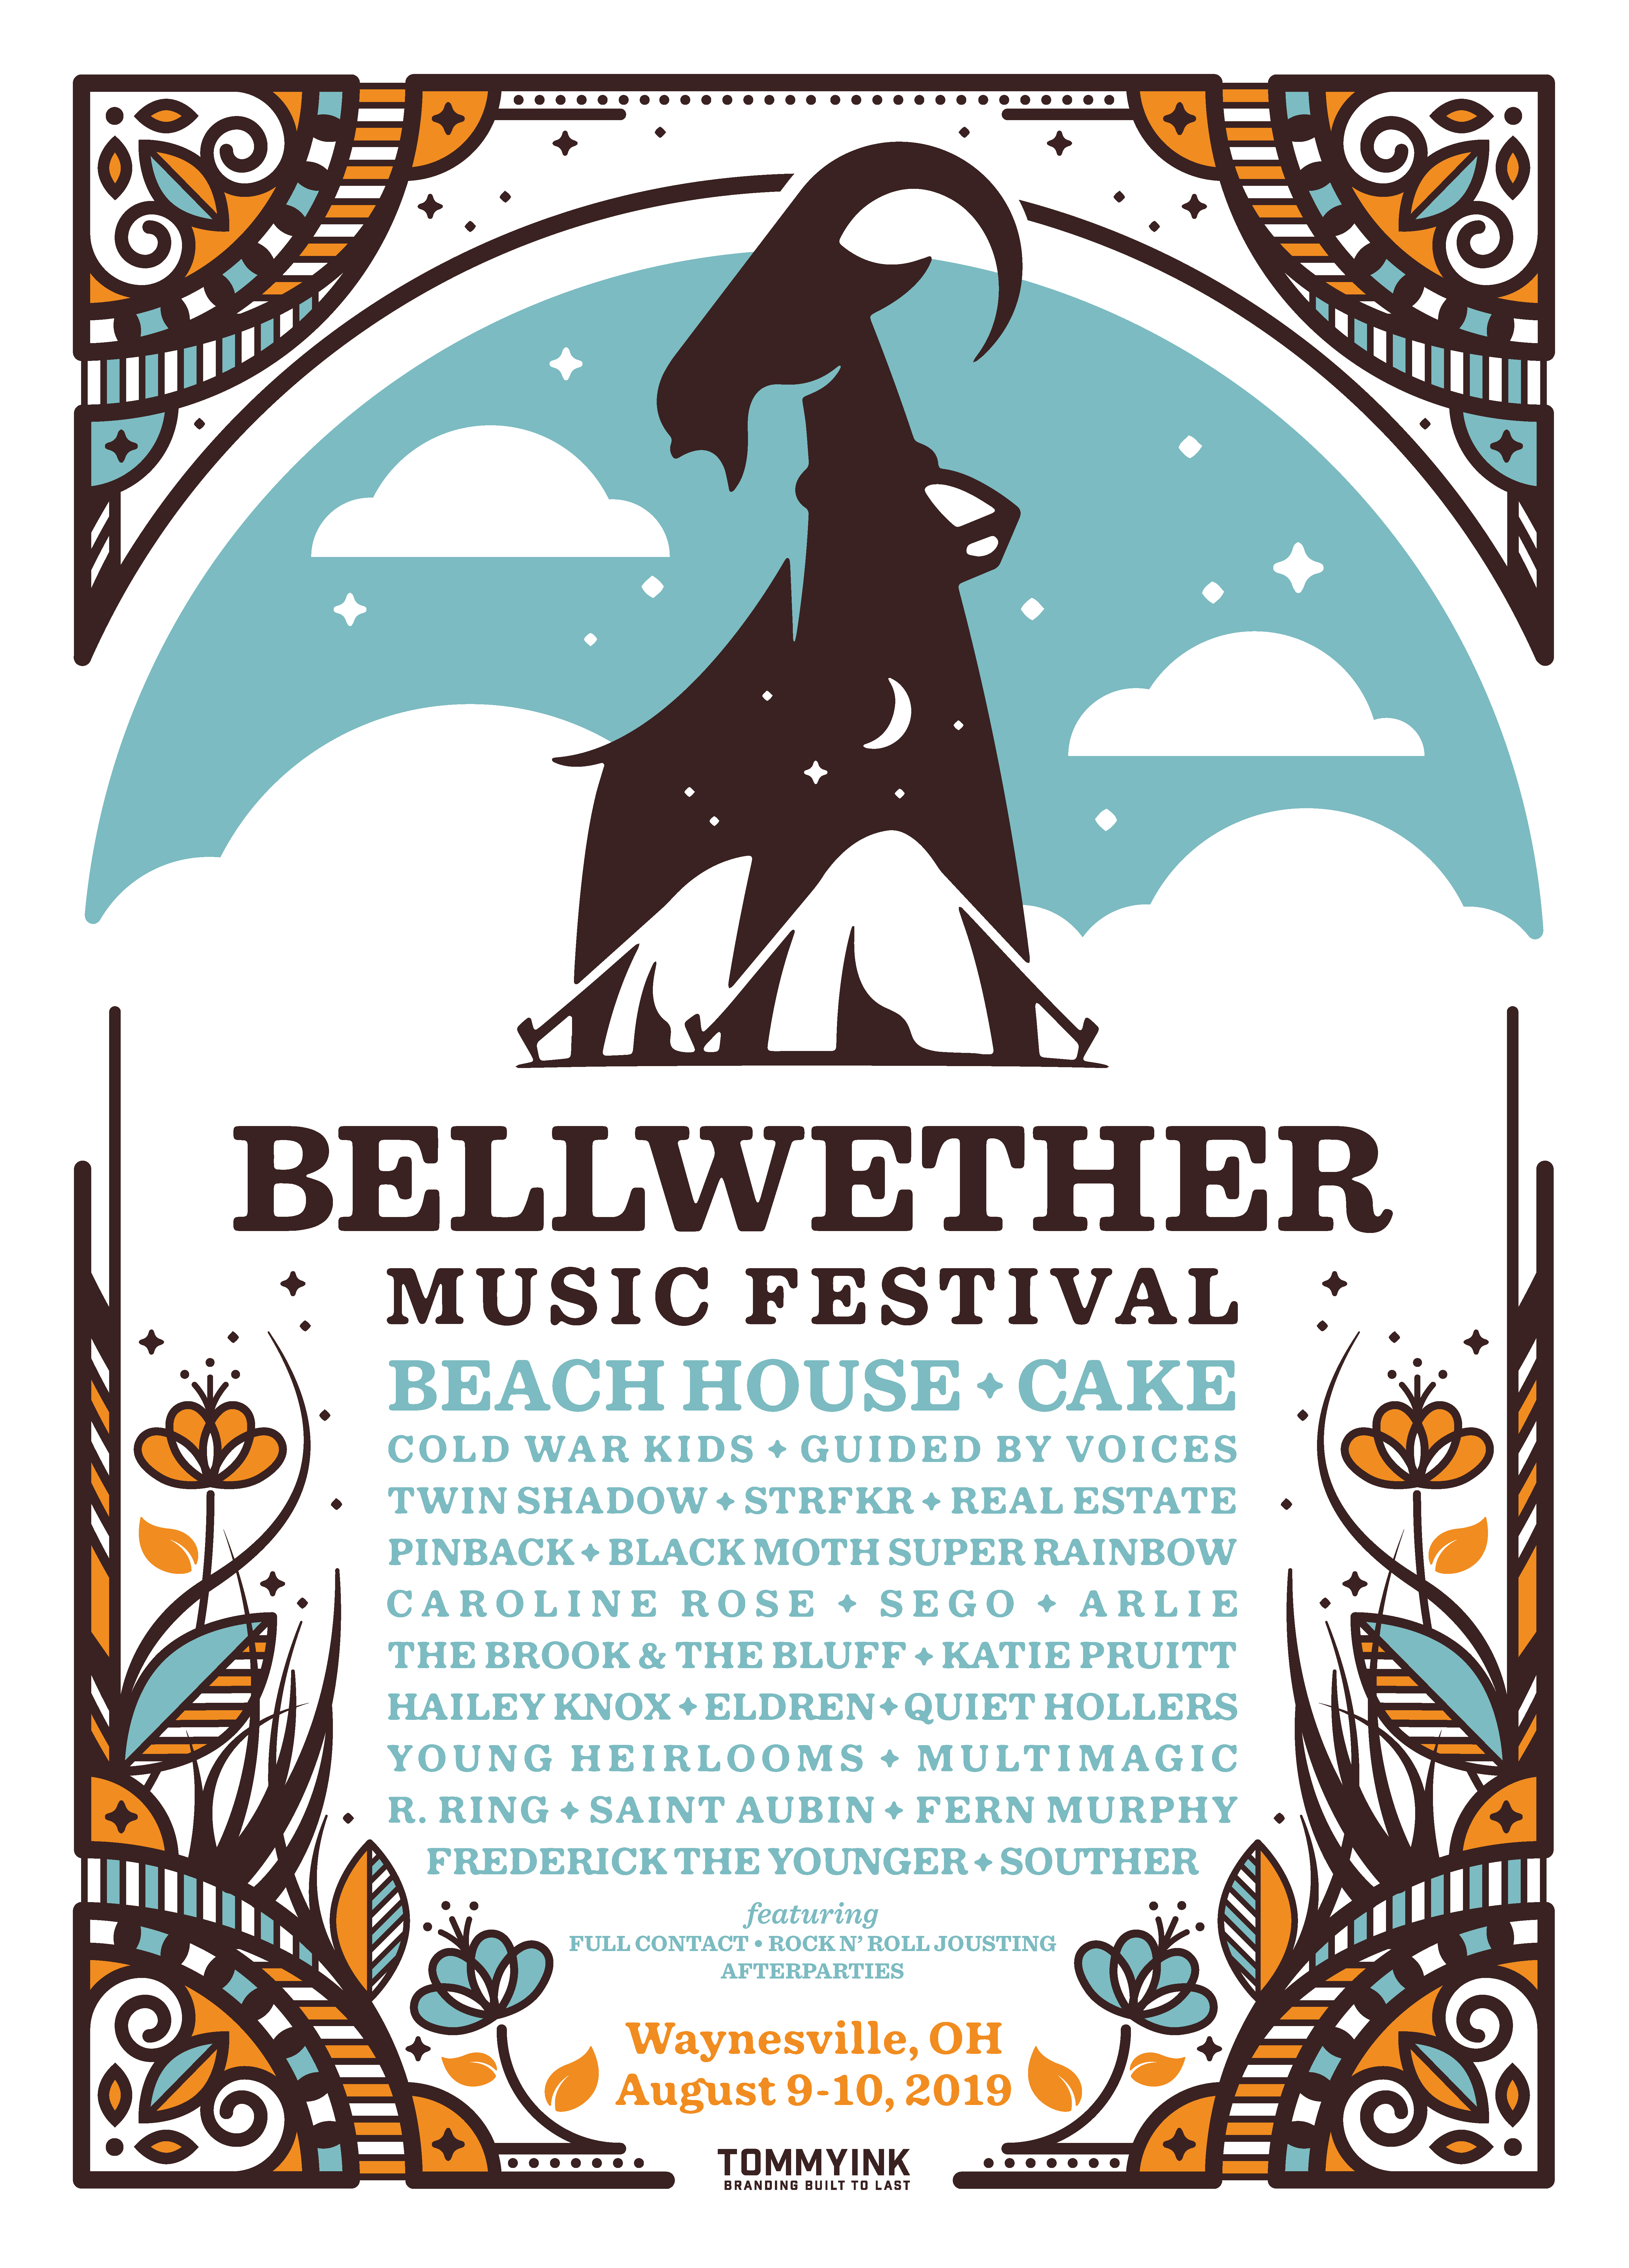 Bellwether Music Festival Announces 2019 Lineup